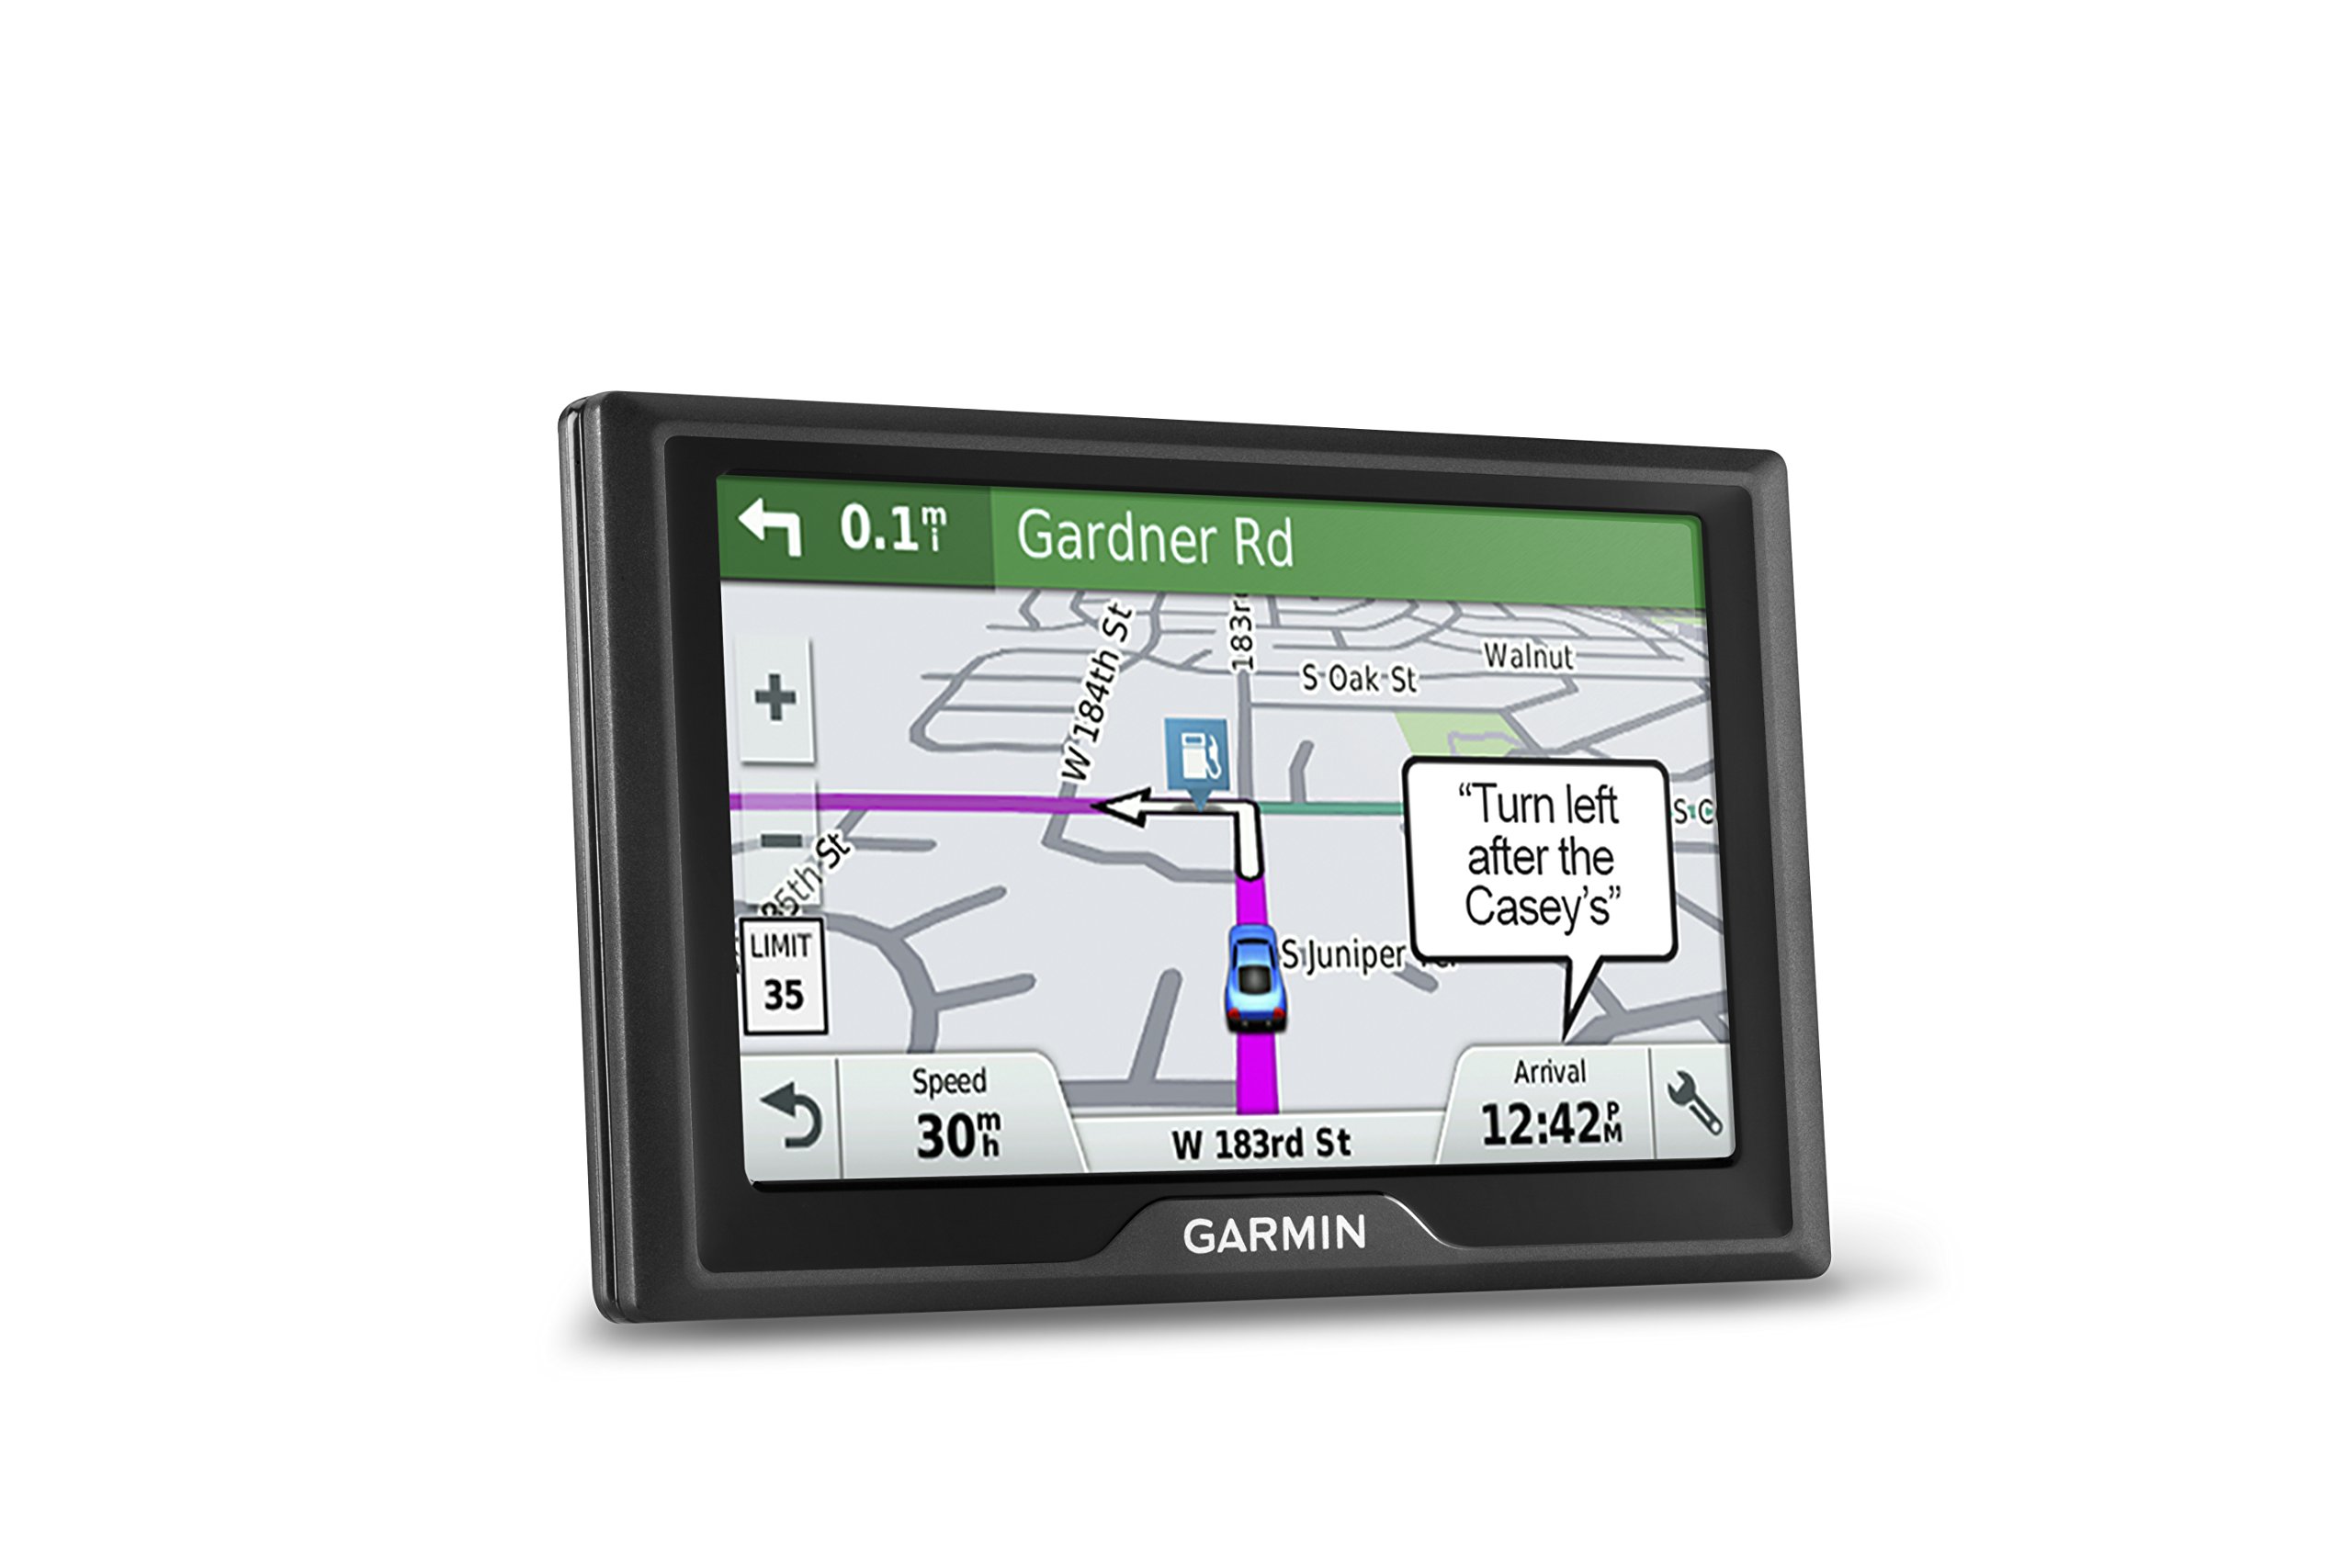 Garmin 010-01678-0B Drive 51 USA LM GPS Navigator System with Lifetime Maps, Spoken Turn-By-Turn Directions, Direct Access, Driver Alerts, TripAdvisor and Foursquare Data